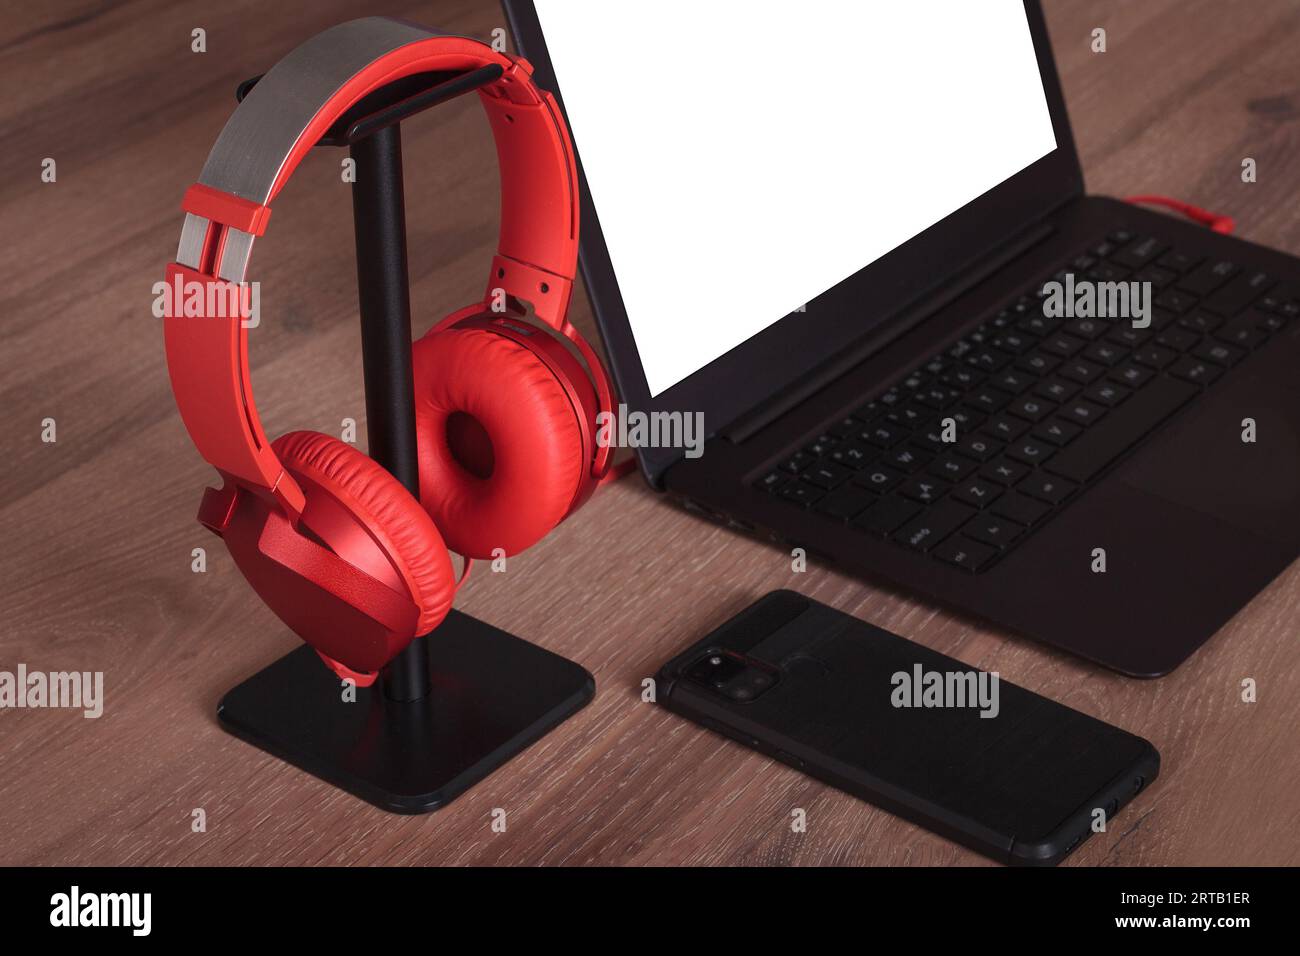 Workspace Setup: Laptop and Red Headphones on Desk Stock Photo